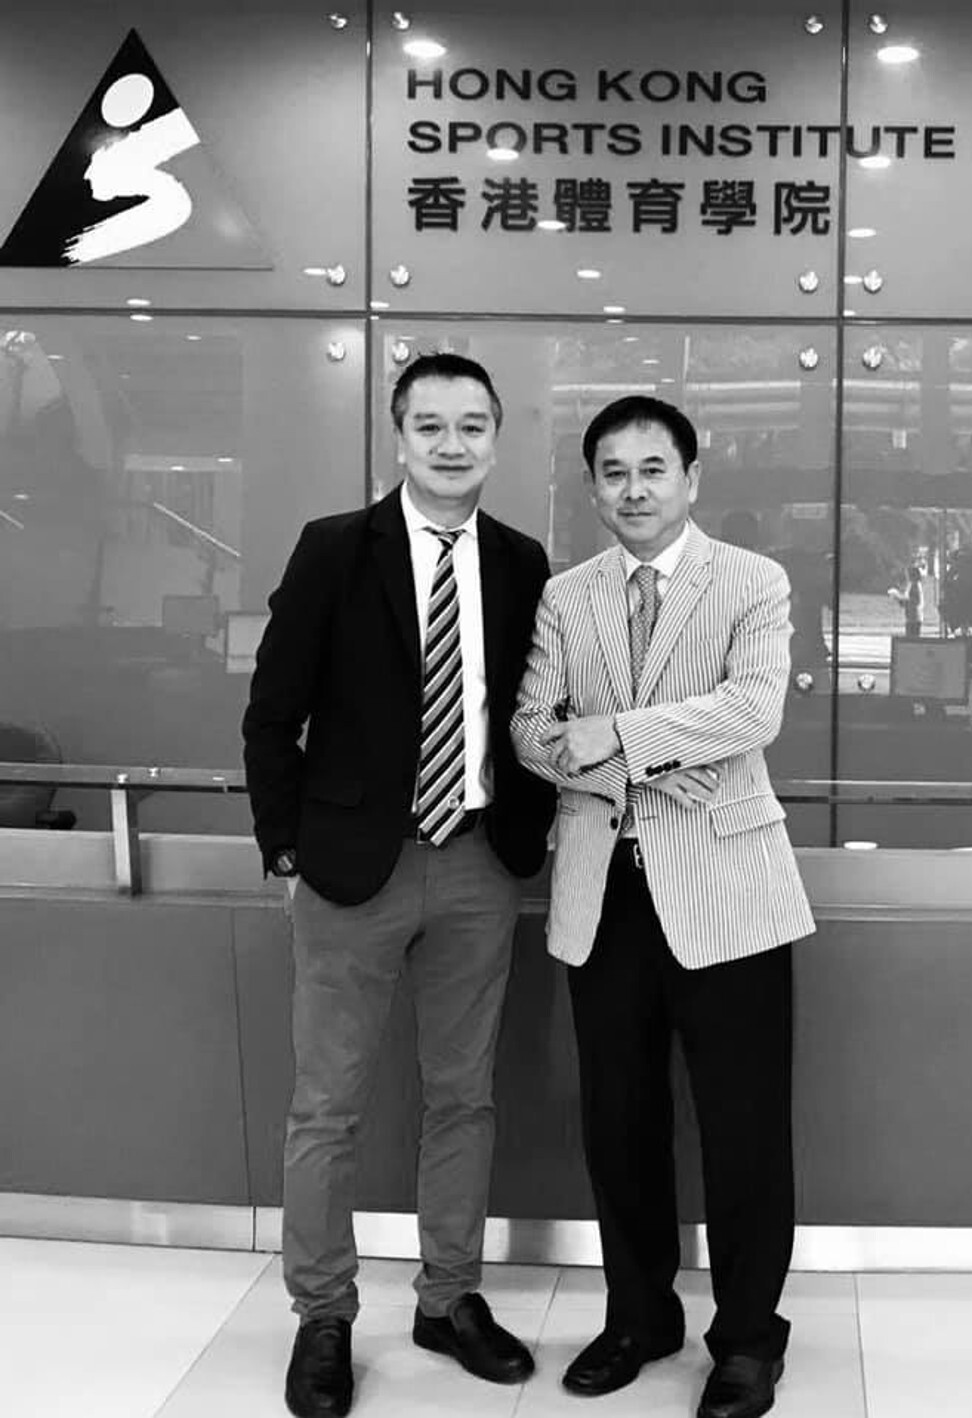 Professor Freddie Fu (right) and Professor Patrick Yung at the Sports Institute, Hong Kong's elite training centre. Photo: Facebook